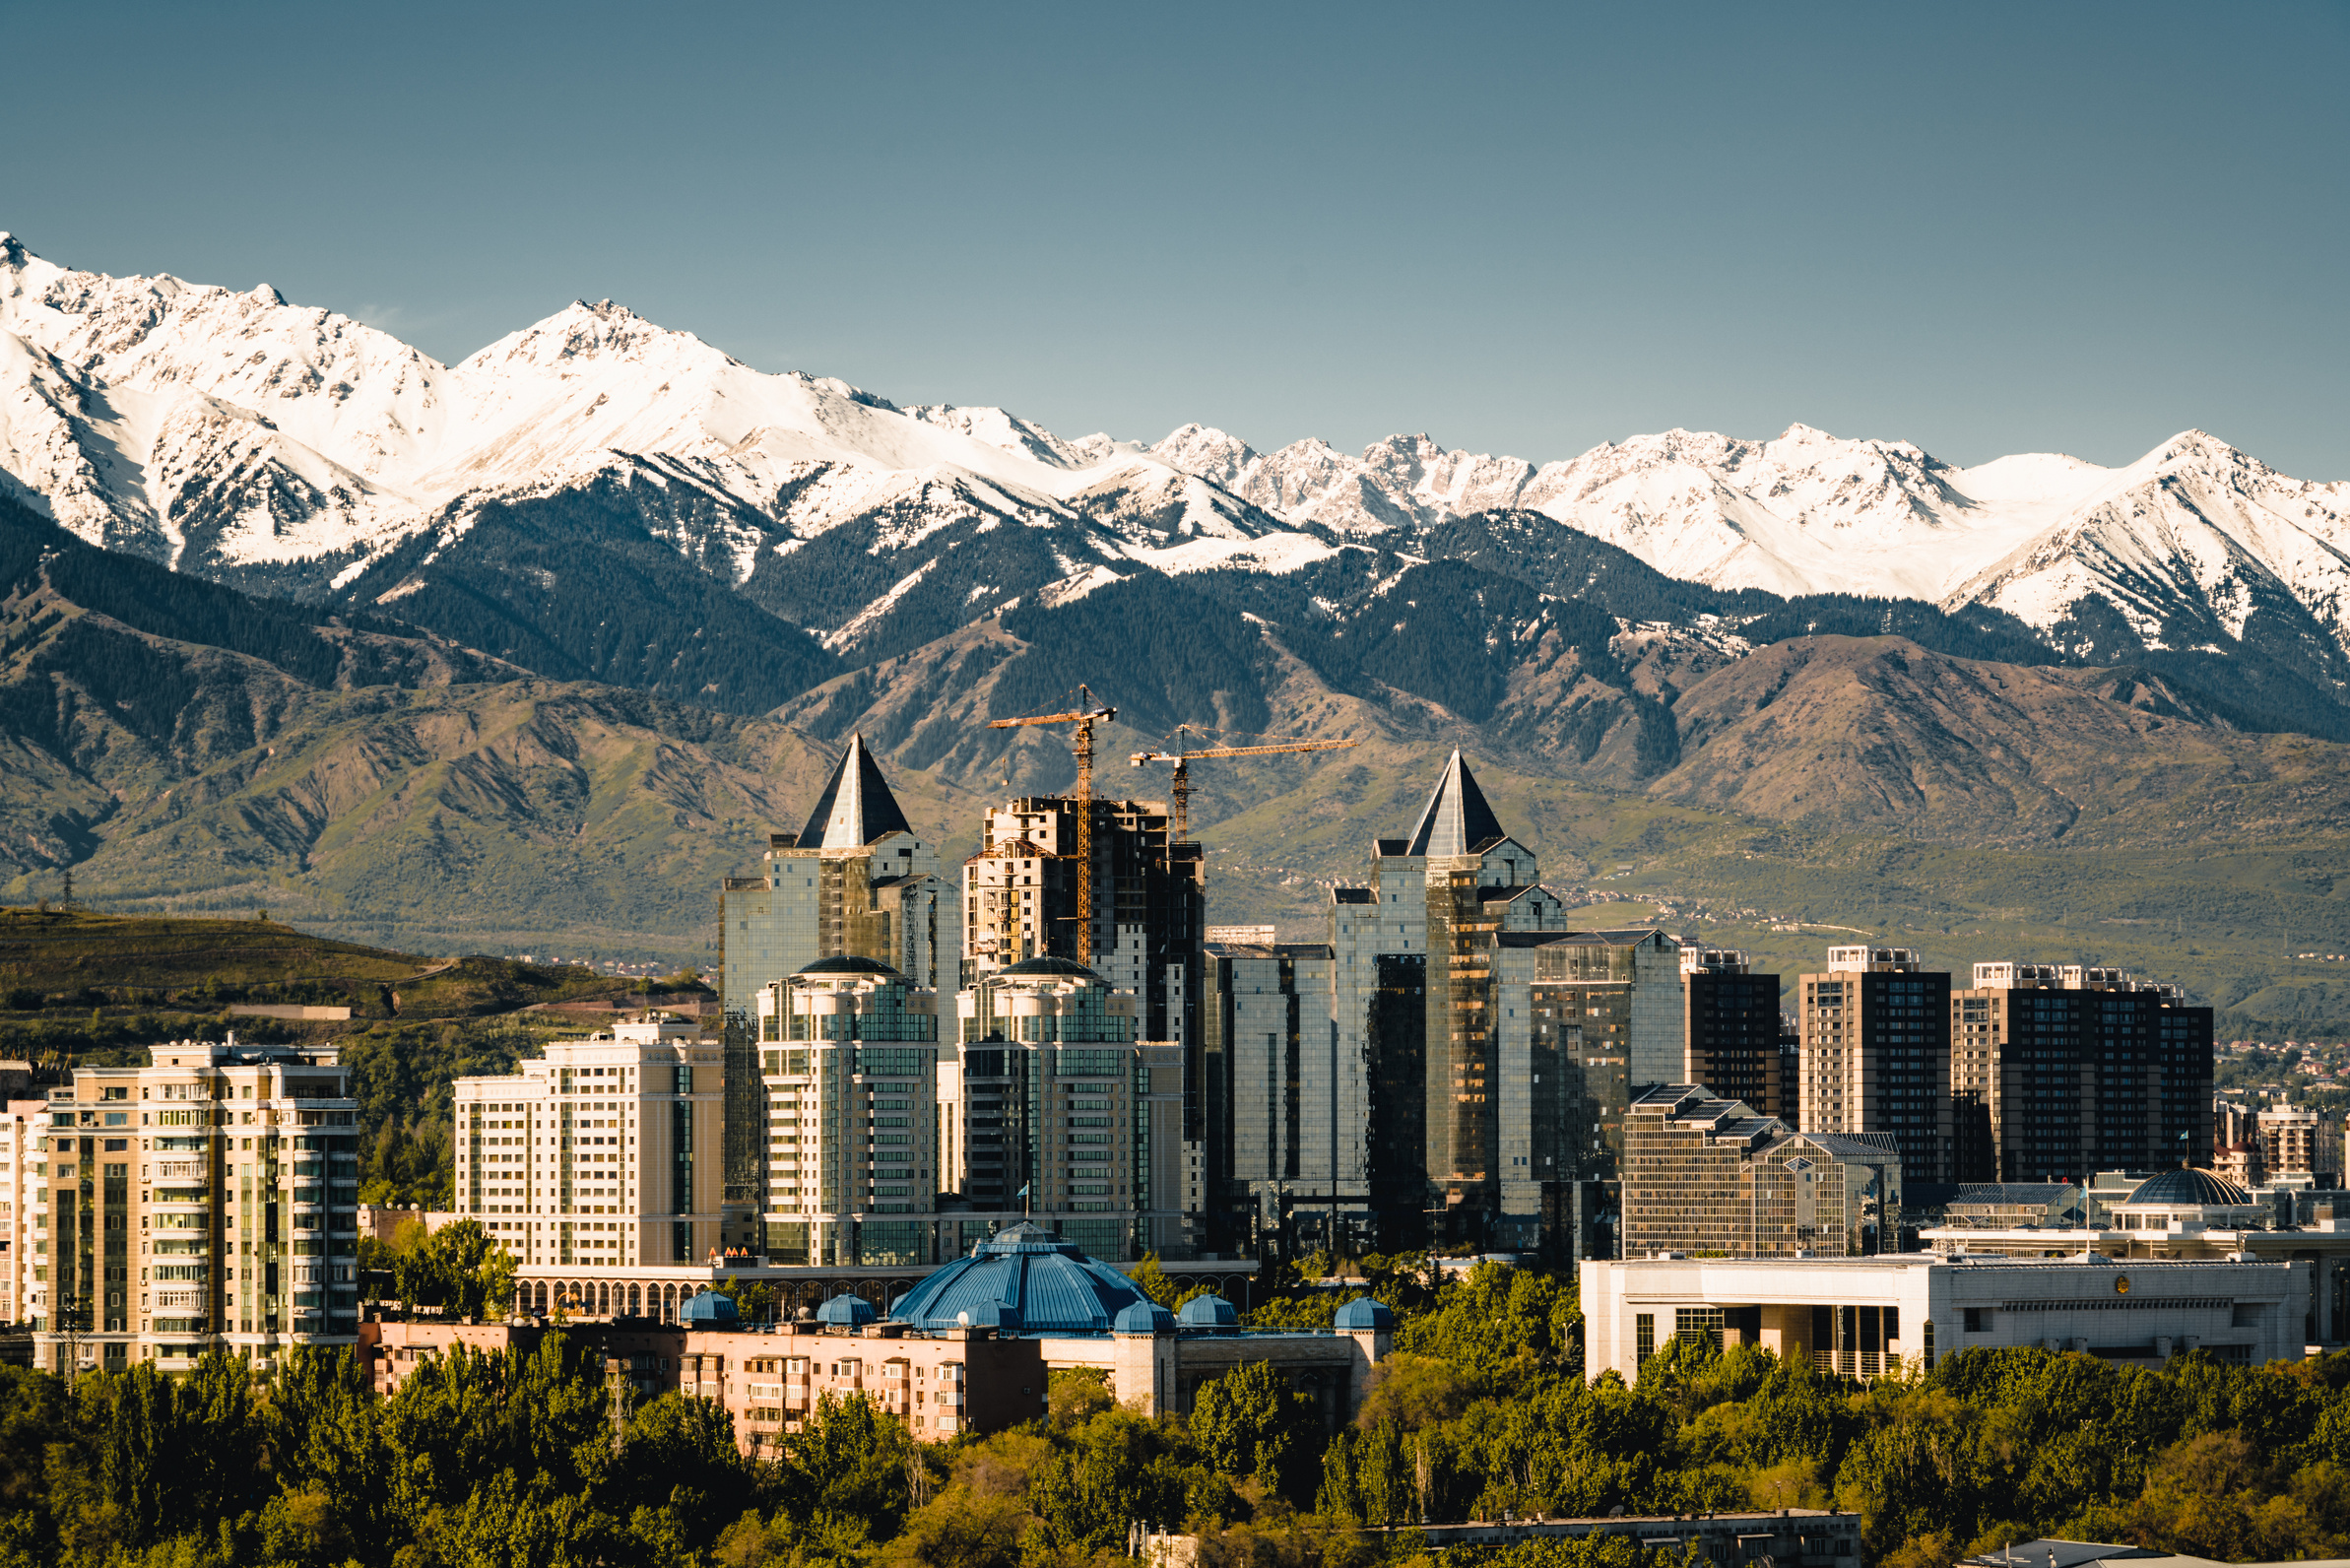 City landscape on a background of snow-capped Tian Shan mountains in Almaty Kazakhstan